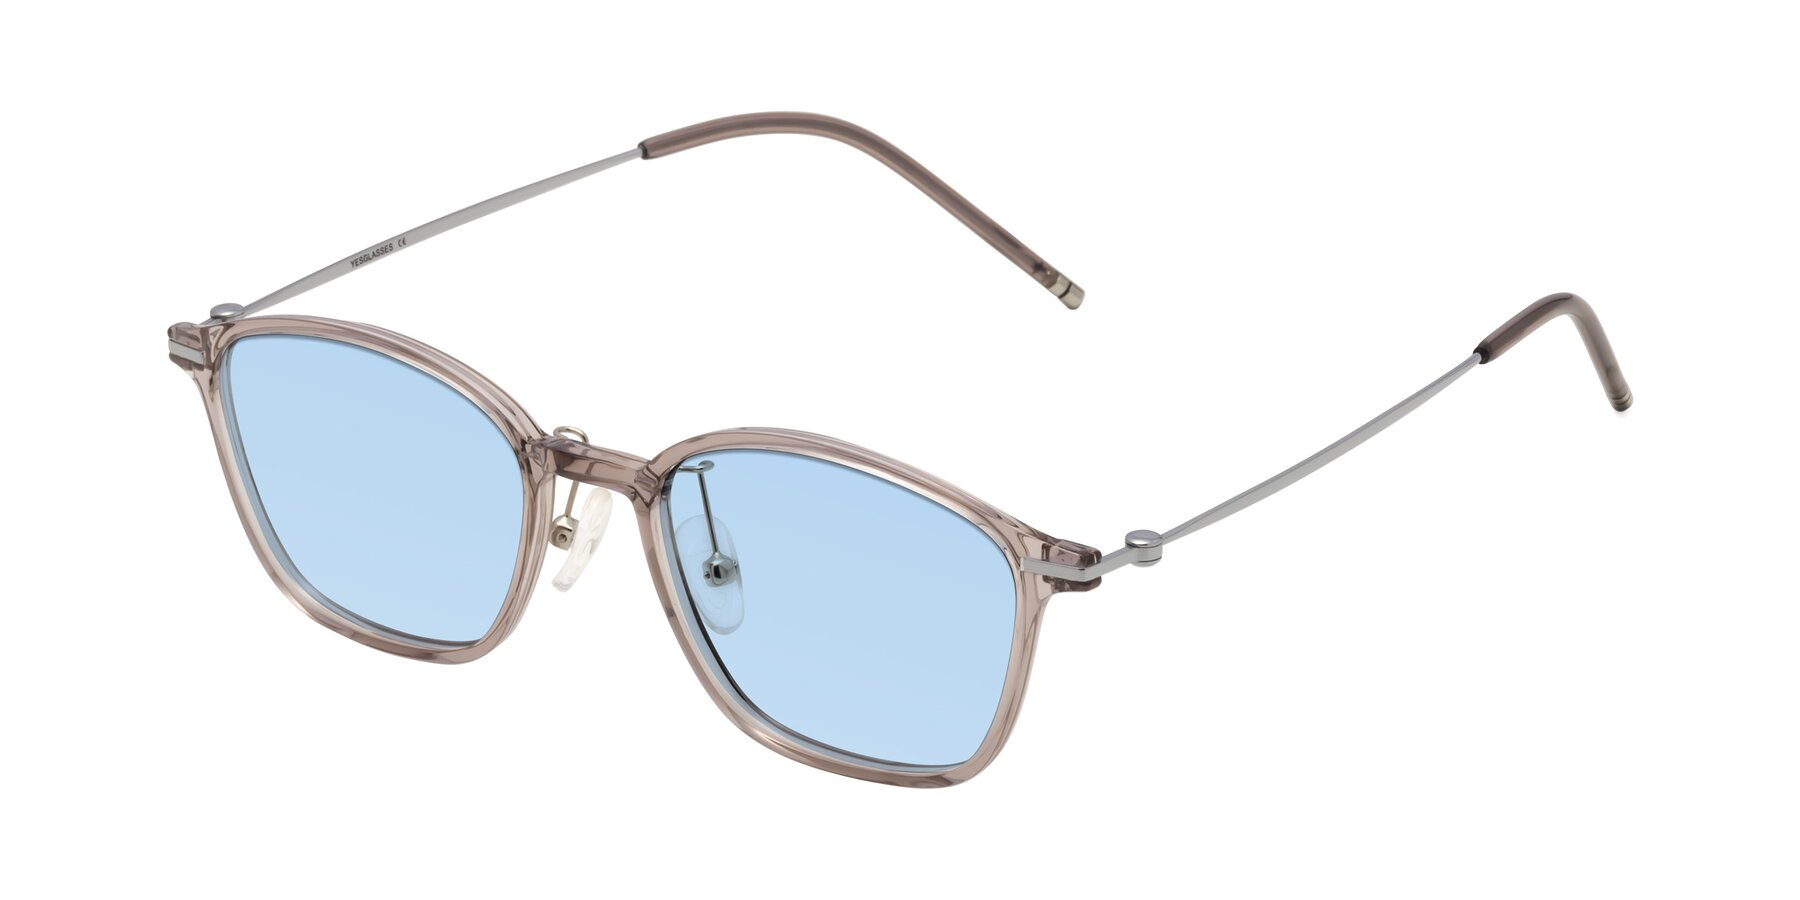 Angle of Cato in Earl Gray with Light Blue Tinted Lenses